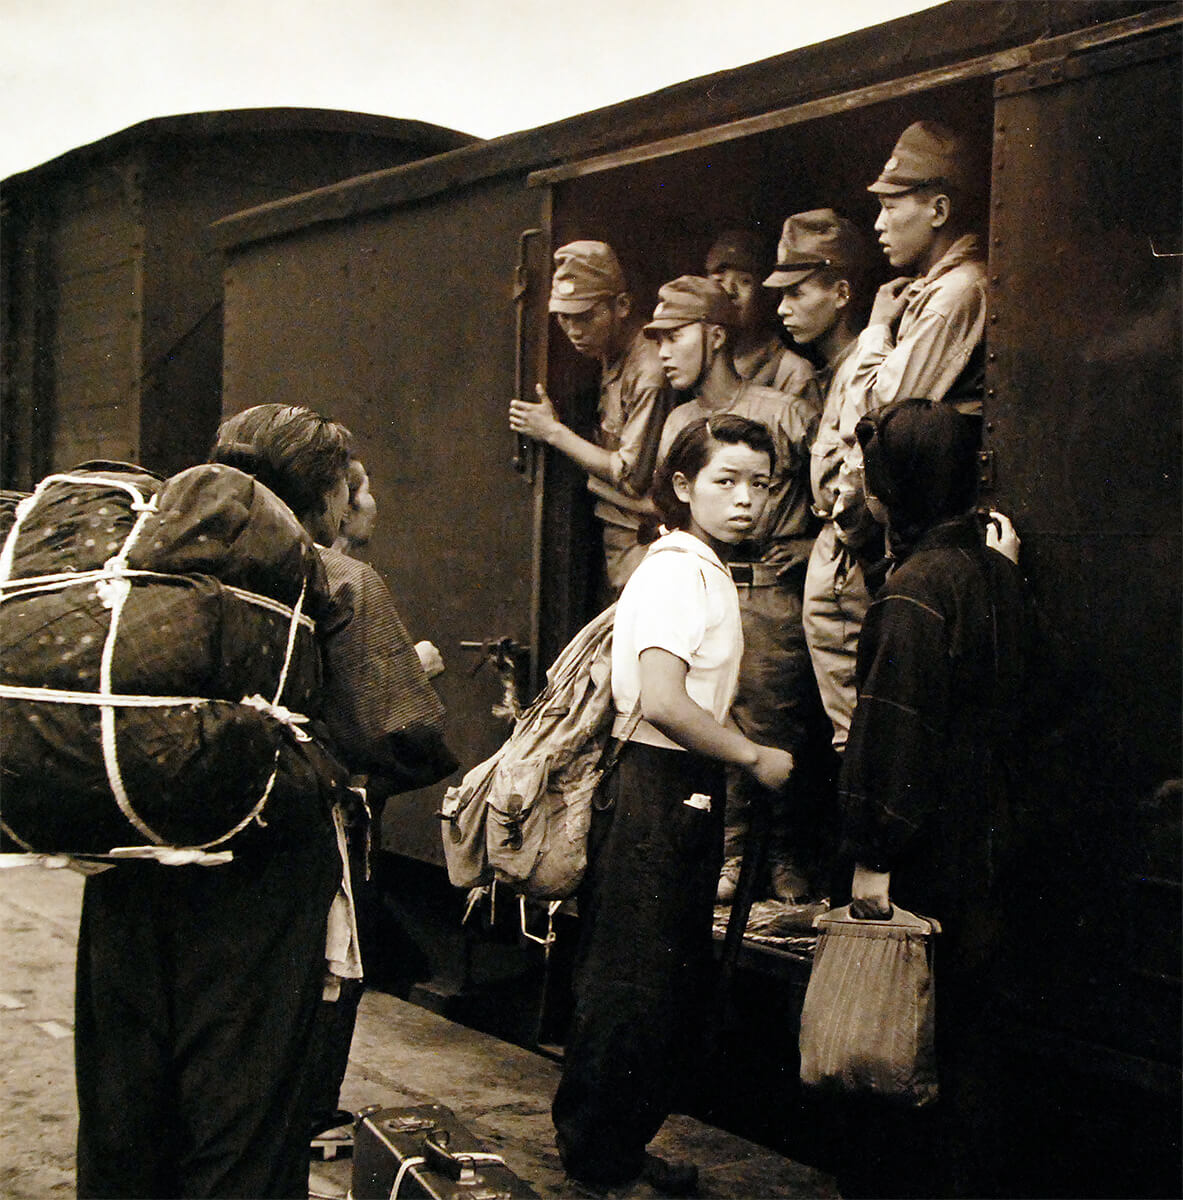 Japanese soldiers and civilians at a train station, Hiroshima, Japan, Sep 1945,  National Museum of the United States Navy<p>© Wayne Miller</p>